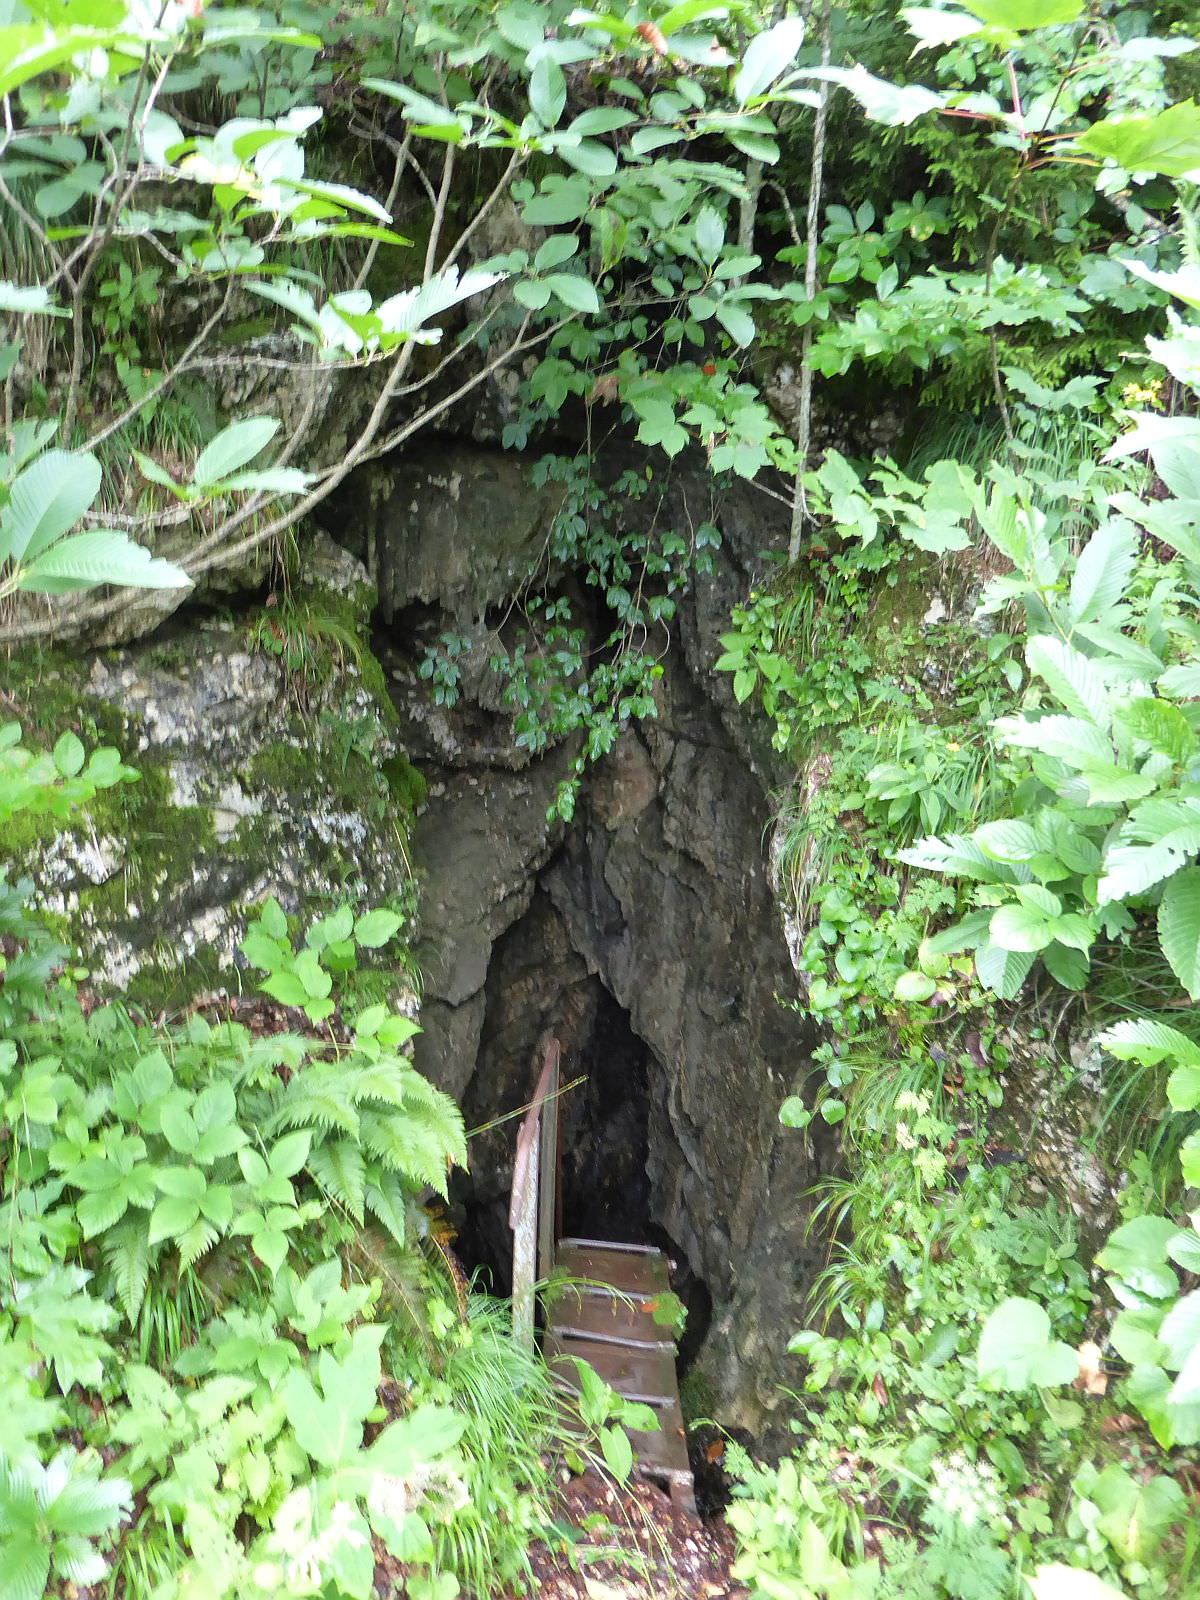 Entrance to the cave with a water spring